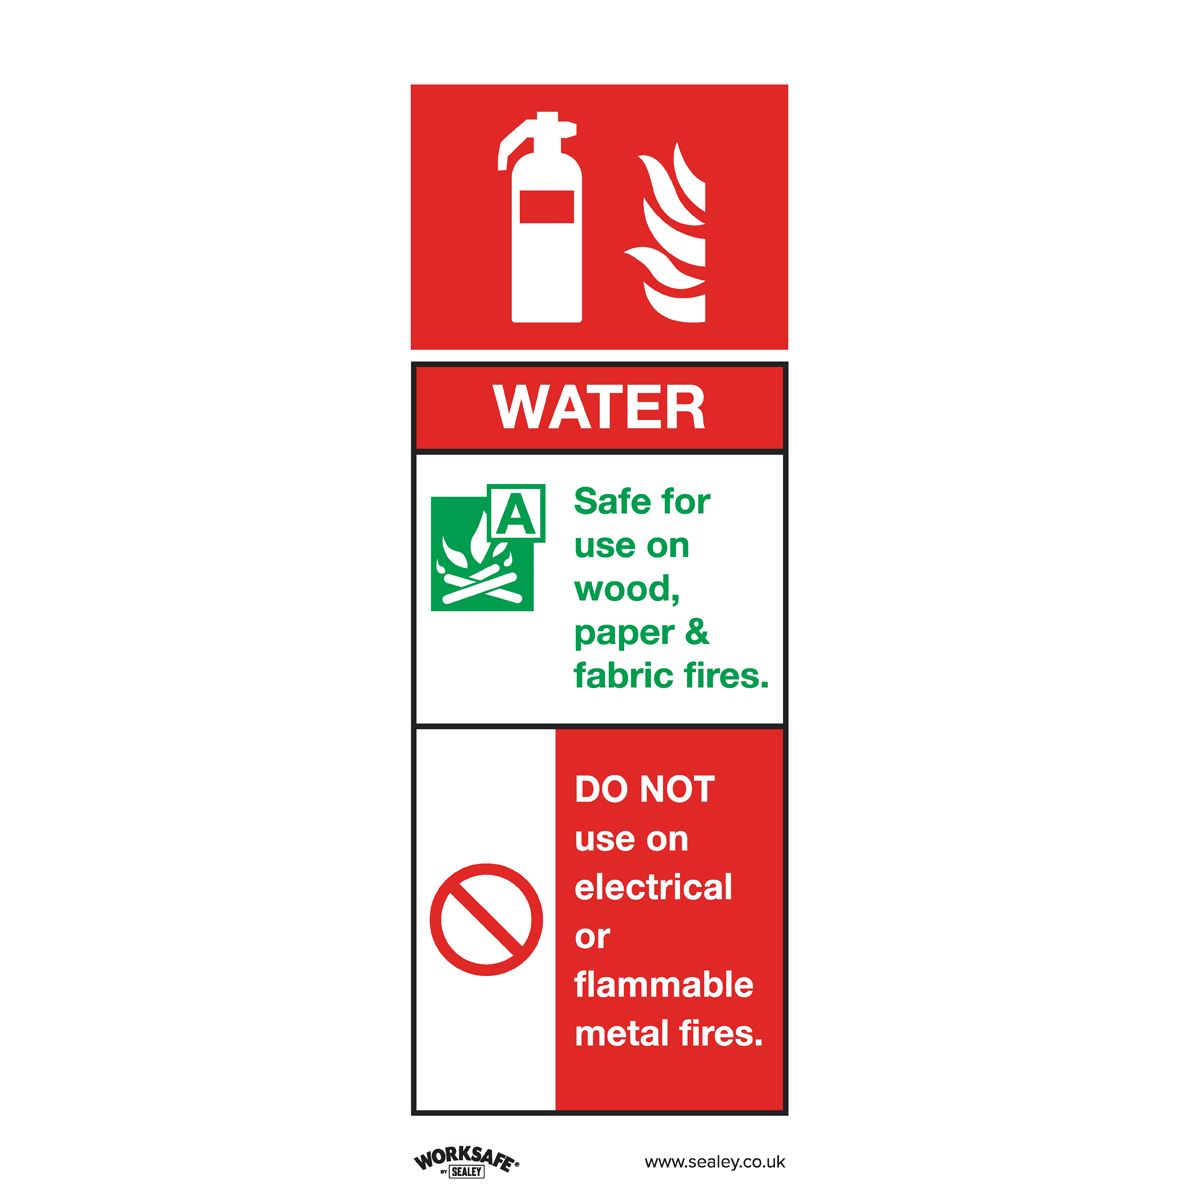 Worksafe by Sealey Safe Conditions Safety Sign - Water Fire Extinguisher - Self-Adhesive Vinyl - Pack of 10